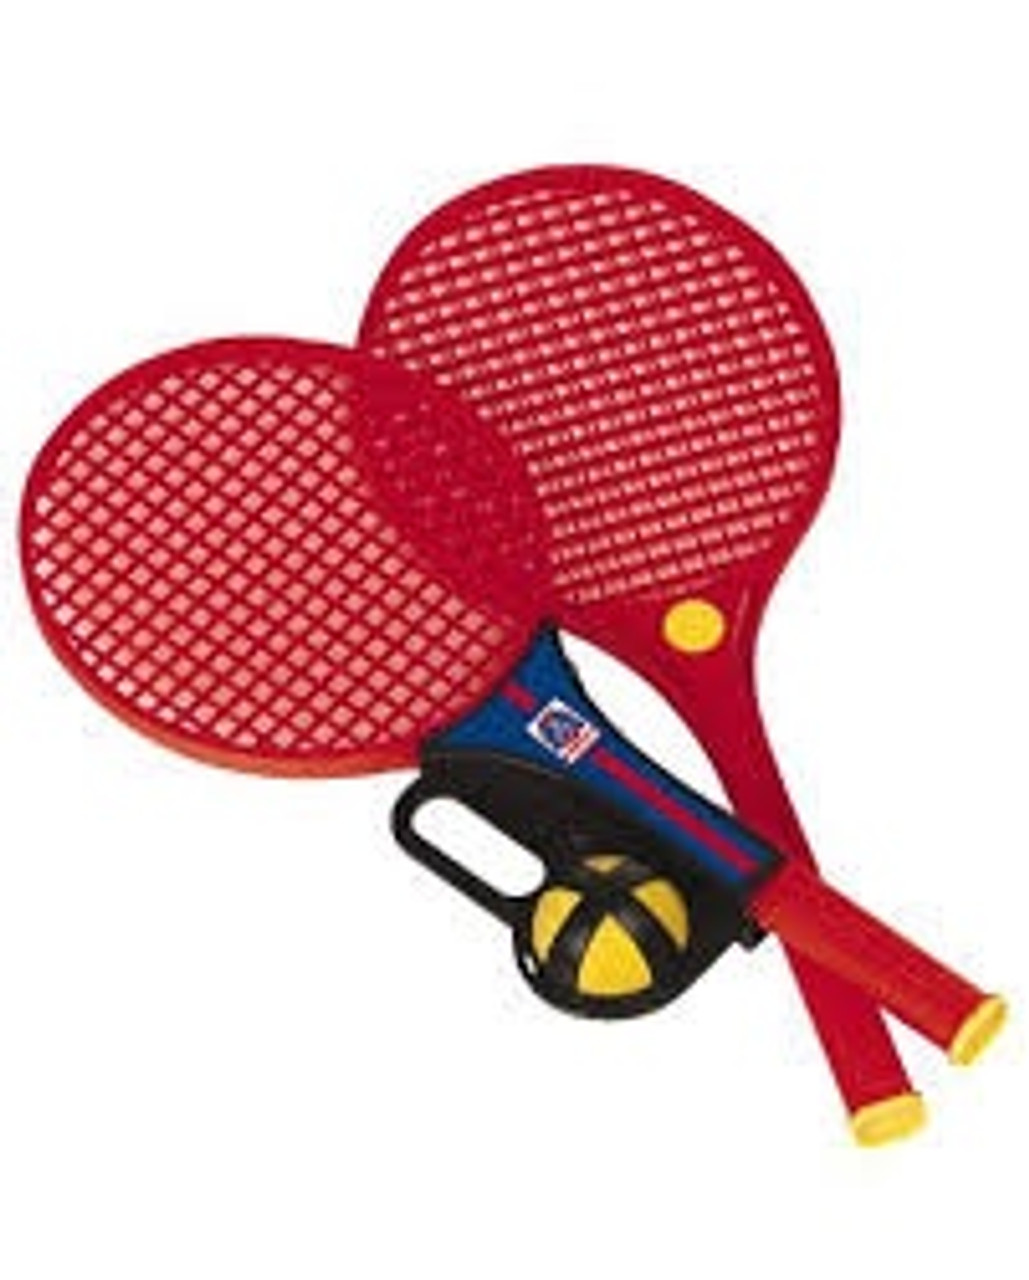 SOFT TENNIS SET IN CARRY CASE